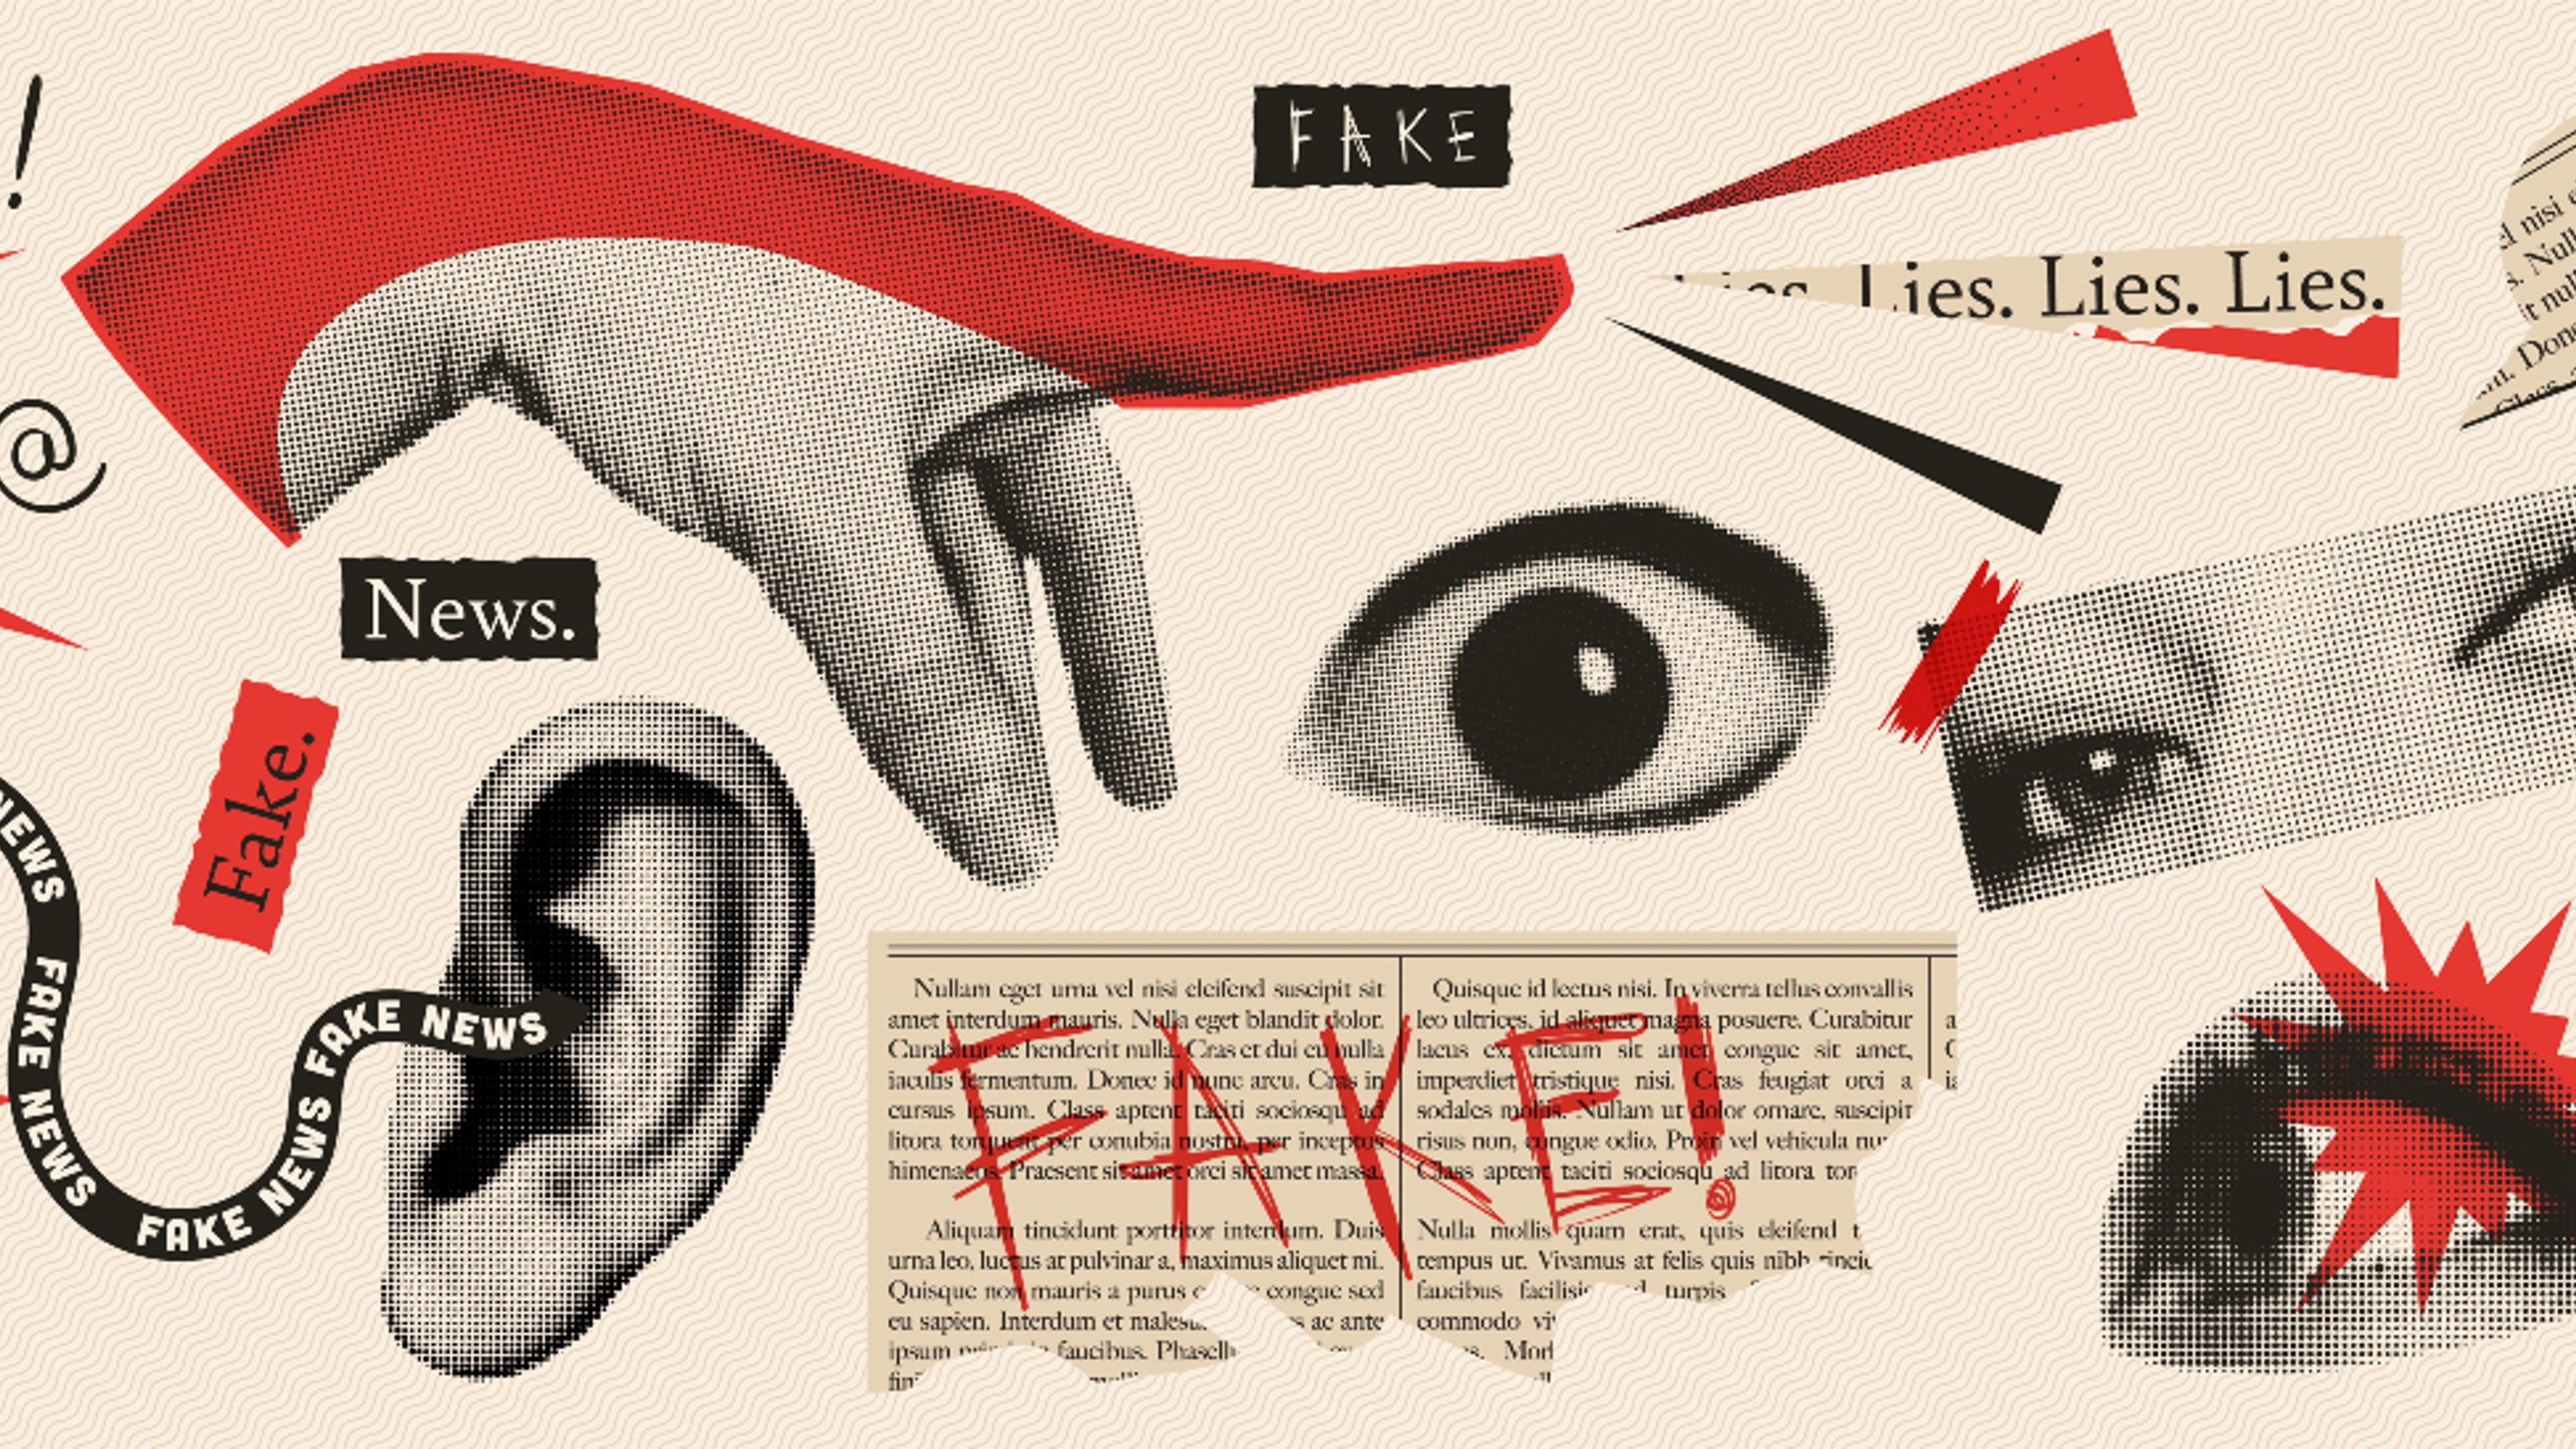 A collage highlighting disinformation with a fake ear.